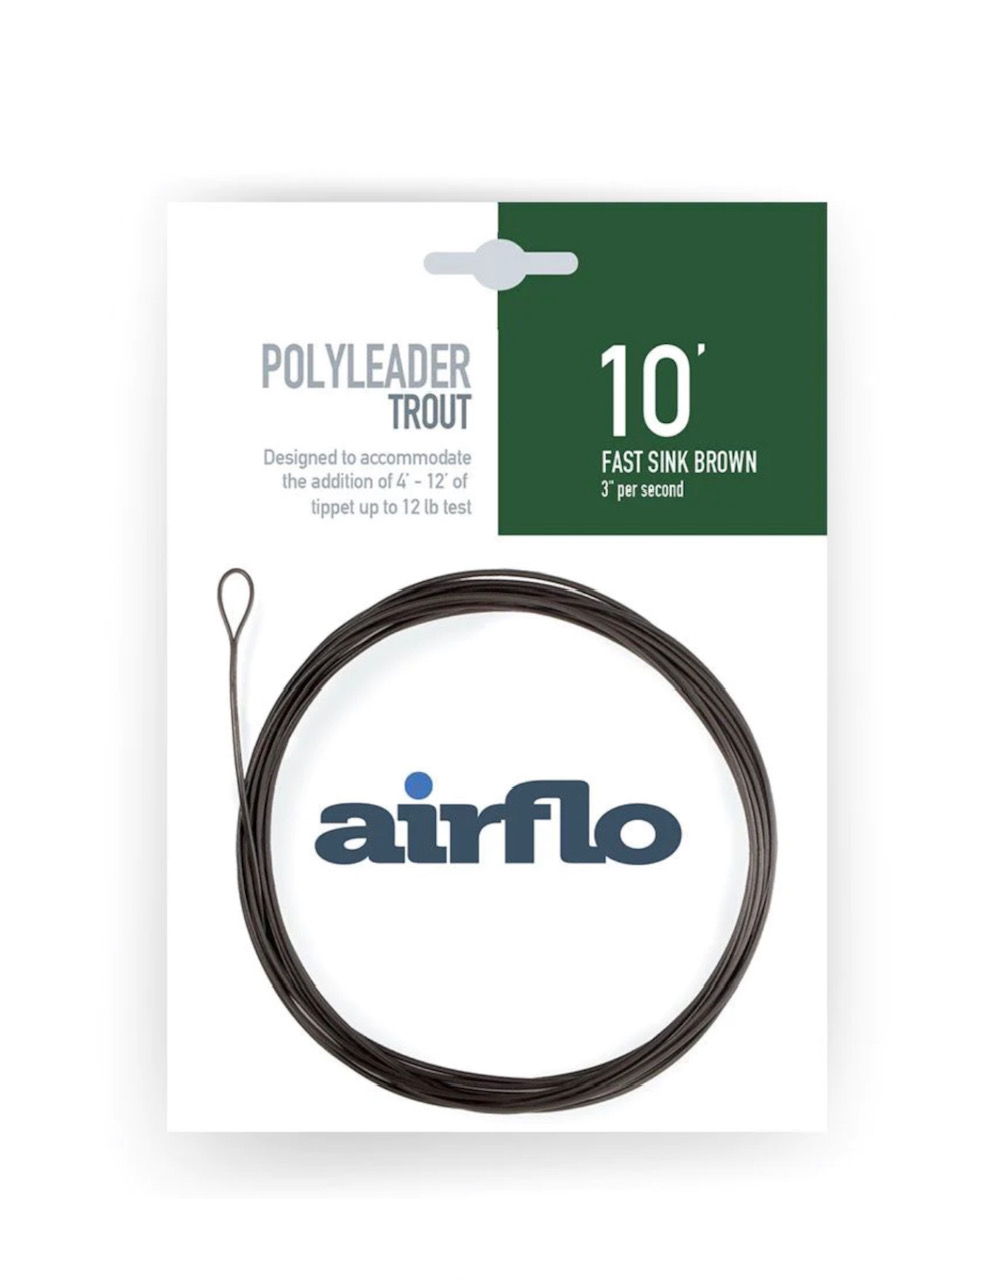 Airflo Polyleader Trout